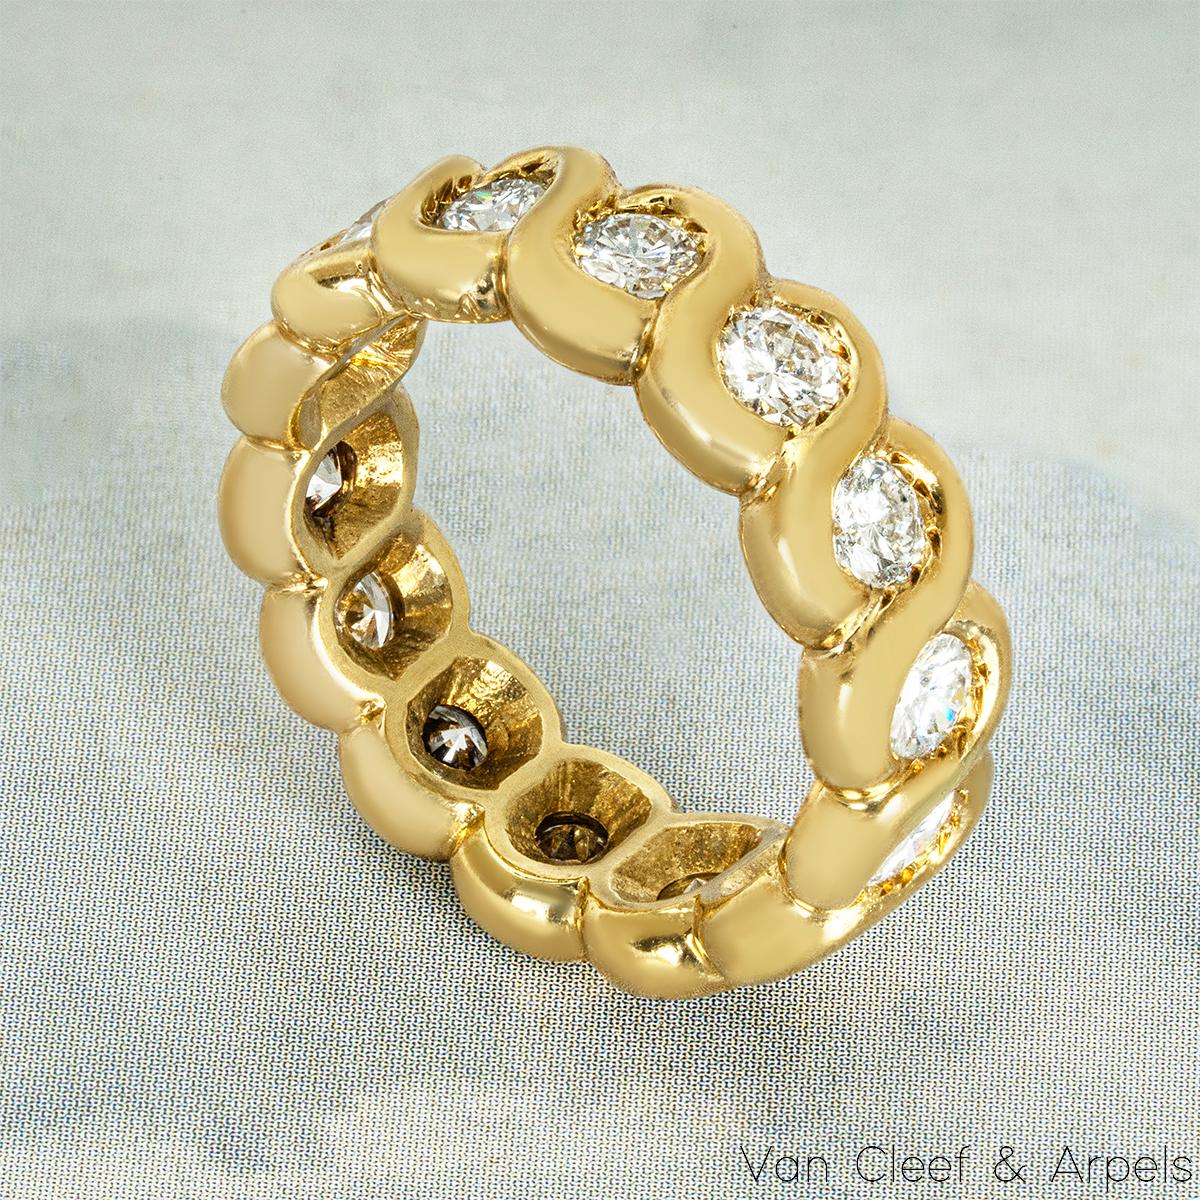 Van Cleef & Arpels Yellow Gold Diamond Eternity Wedding Band Ring 1.40 Cts In Excellent Condition For Sale In London, GB